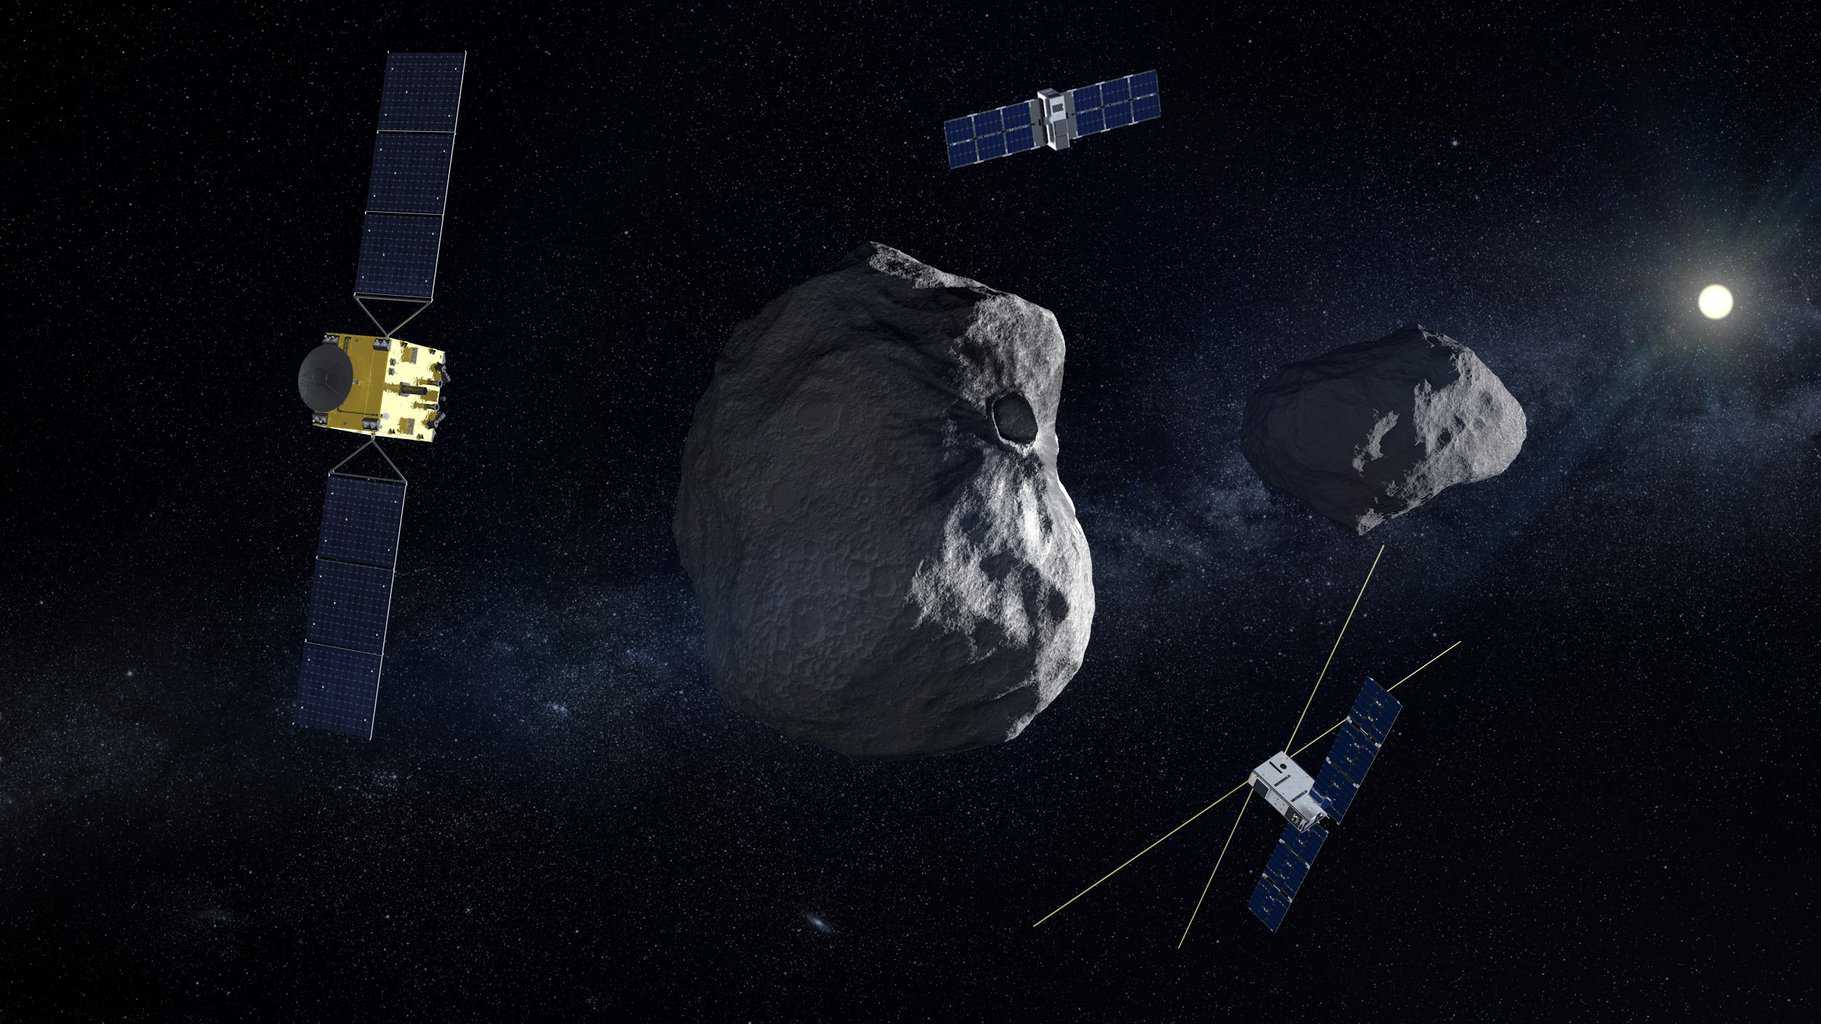 First asteroid deflection test with DART (NASA) and Hera (ESA) missions